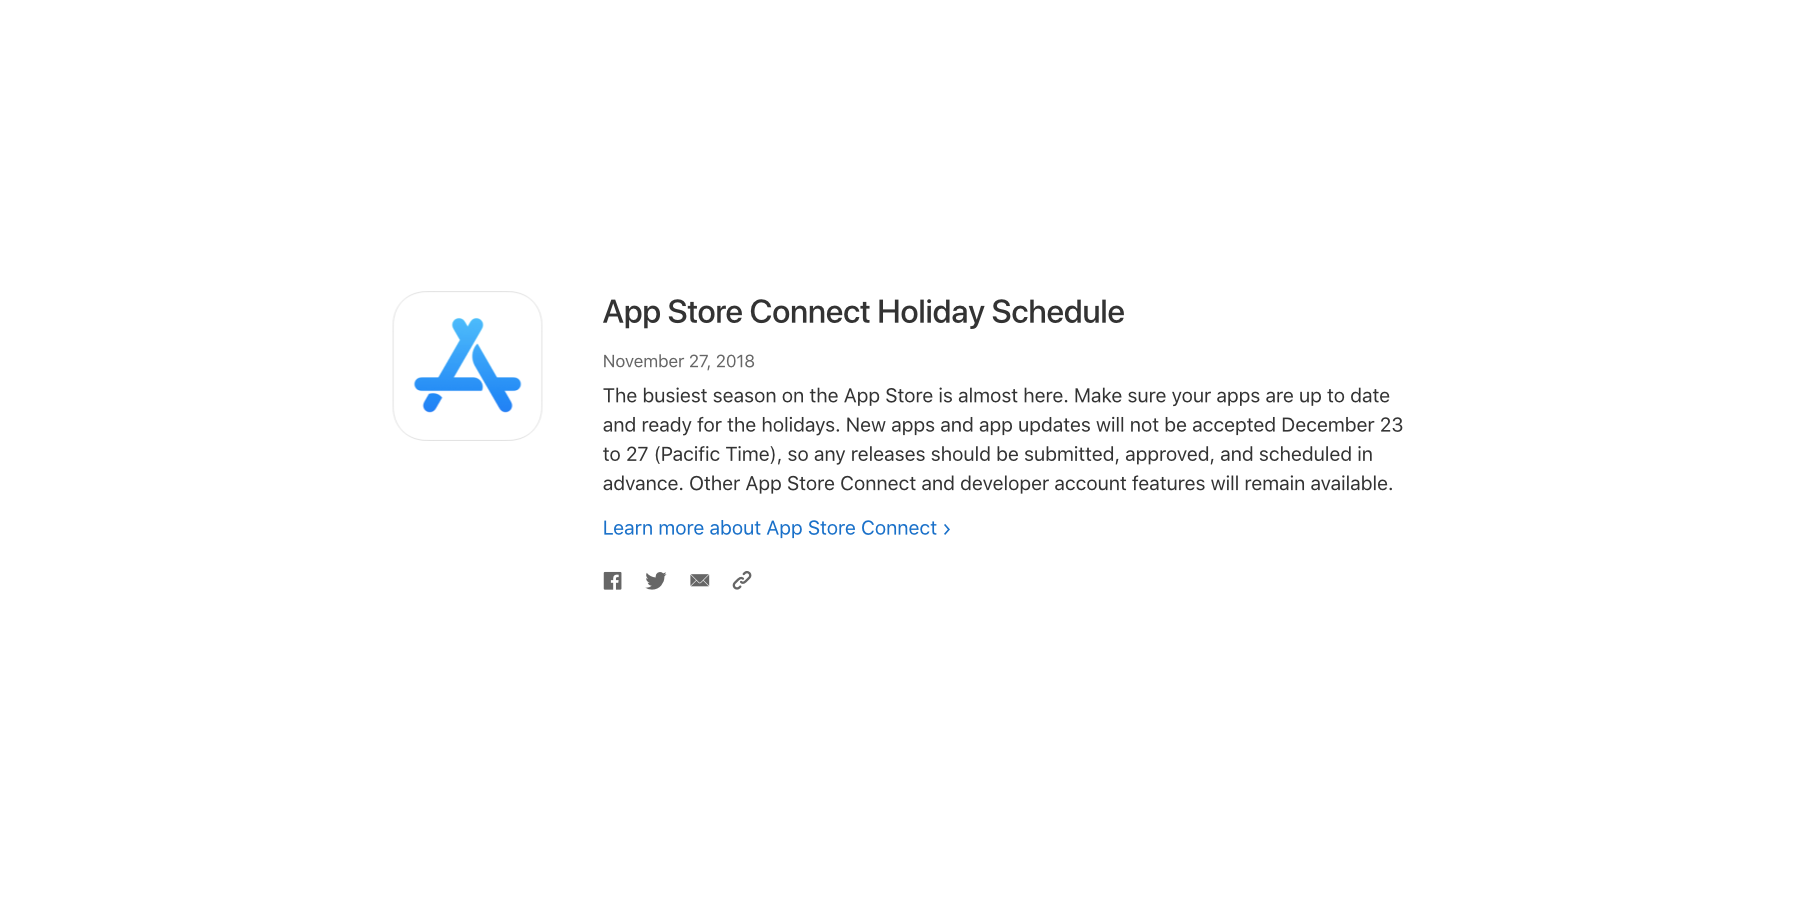 App Store Connect Holiday Schedule